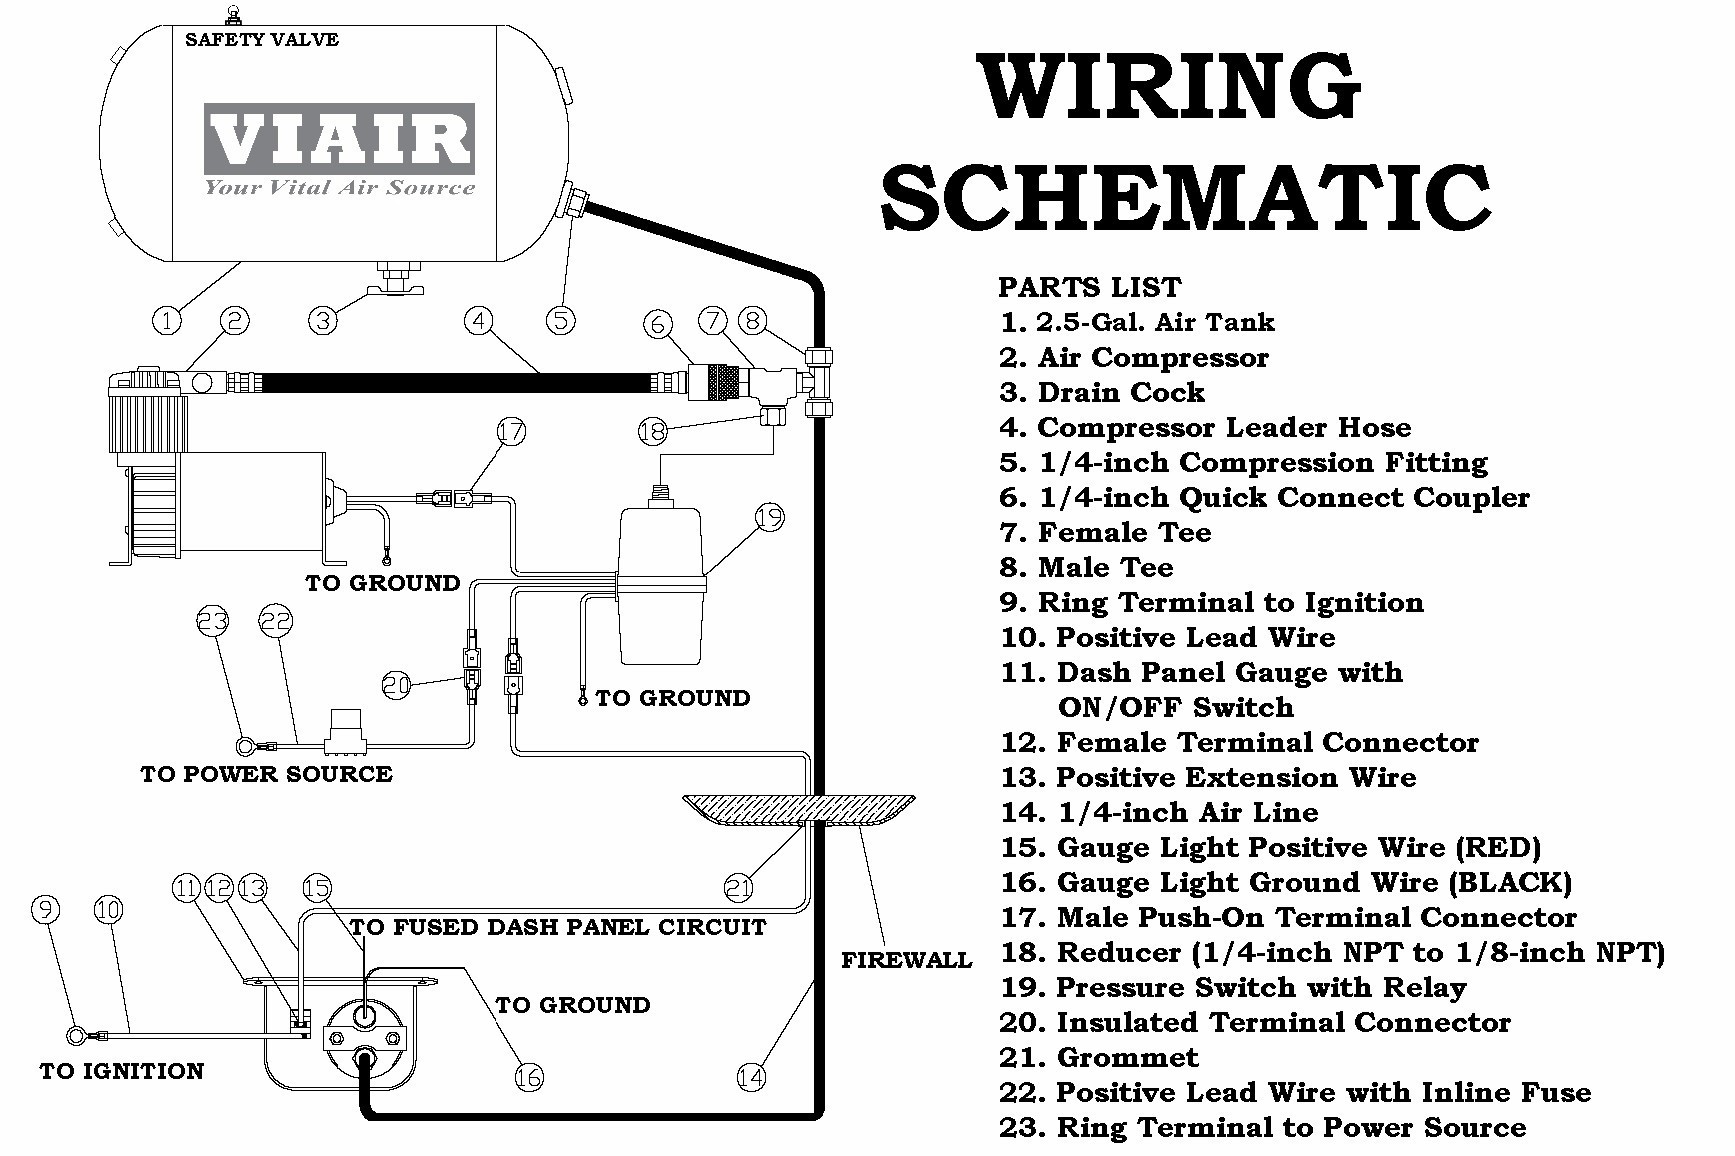 Wiring Diagram for Relay for Horn Valid Car Horn Wiring Diagram Best Horn Wiring Diagram with